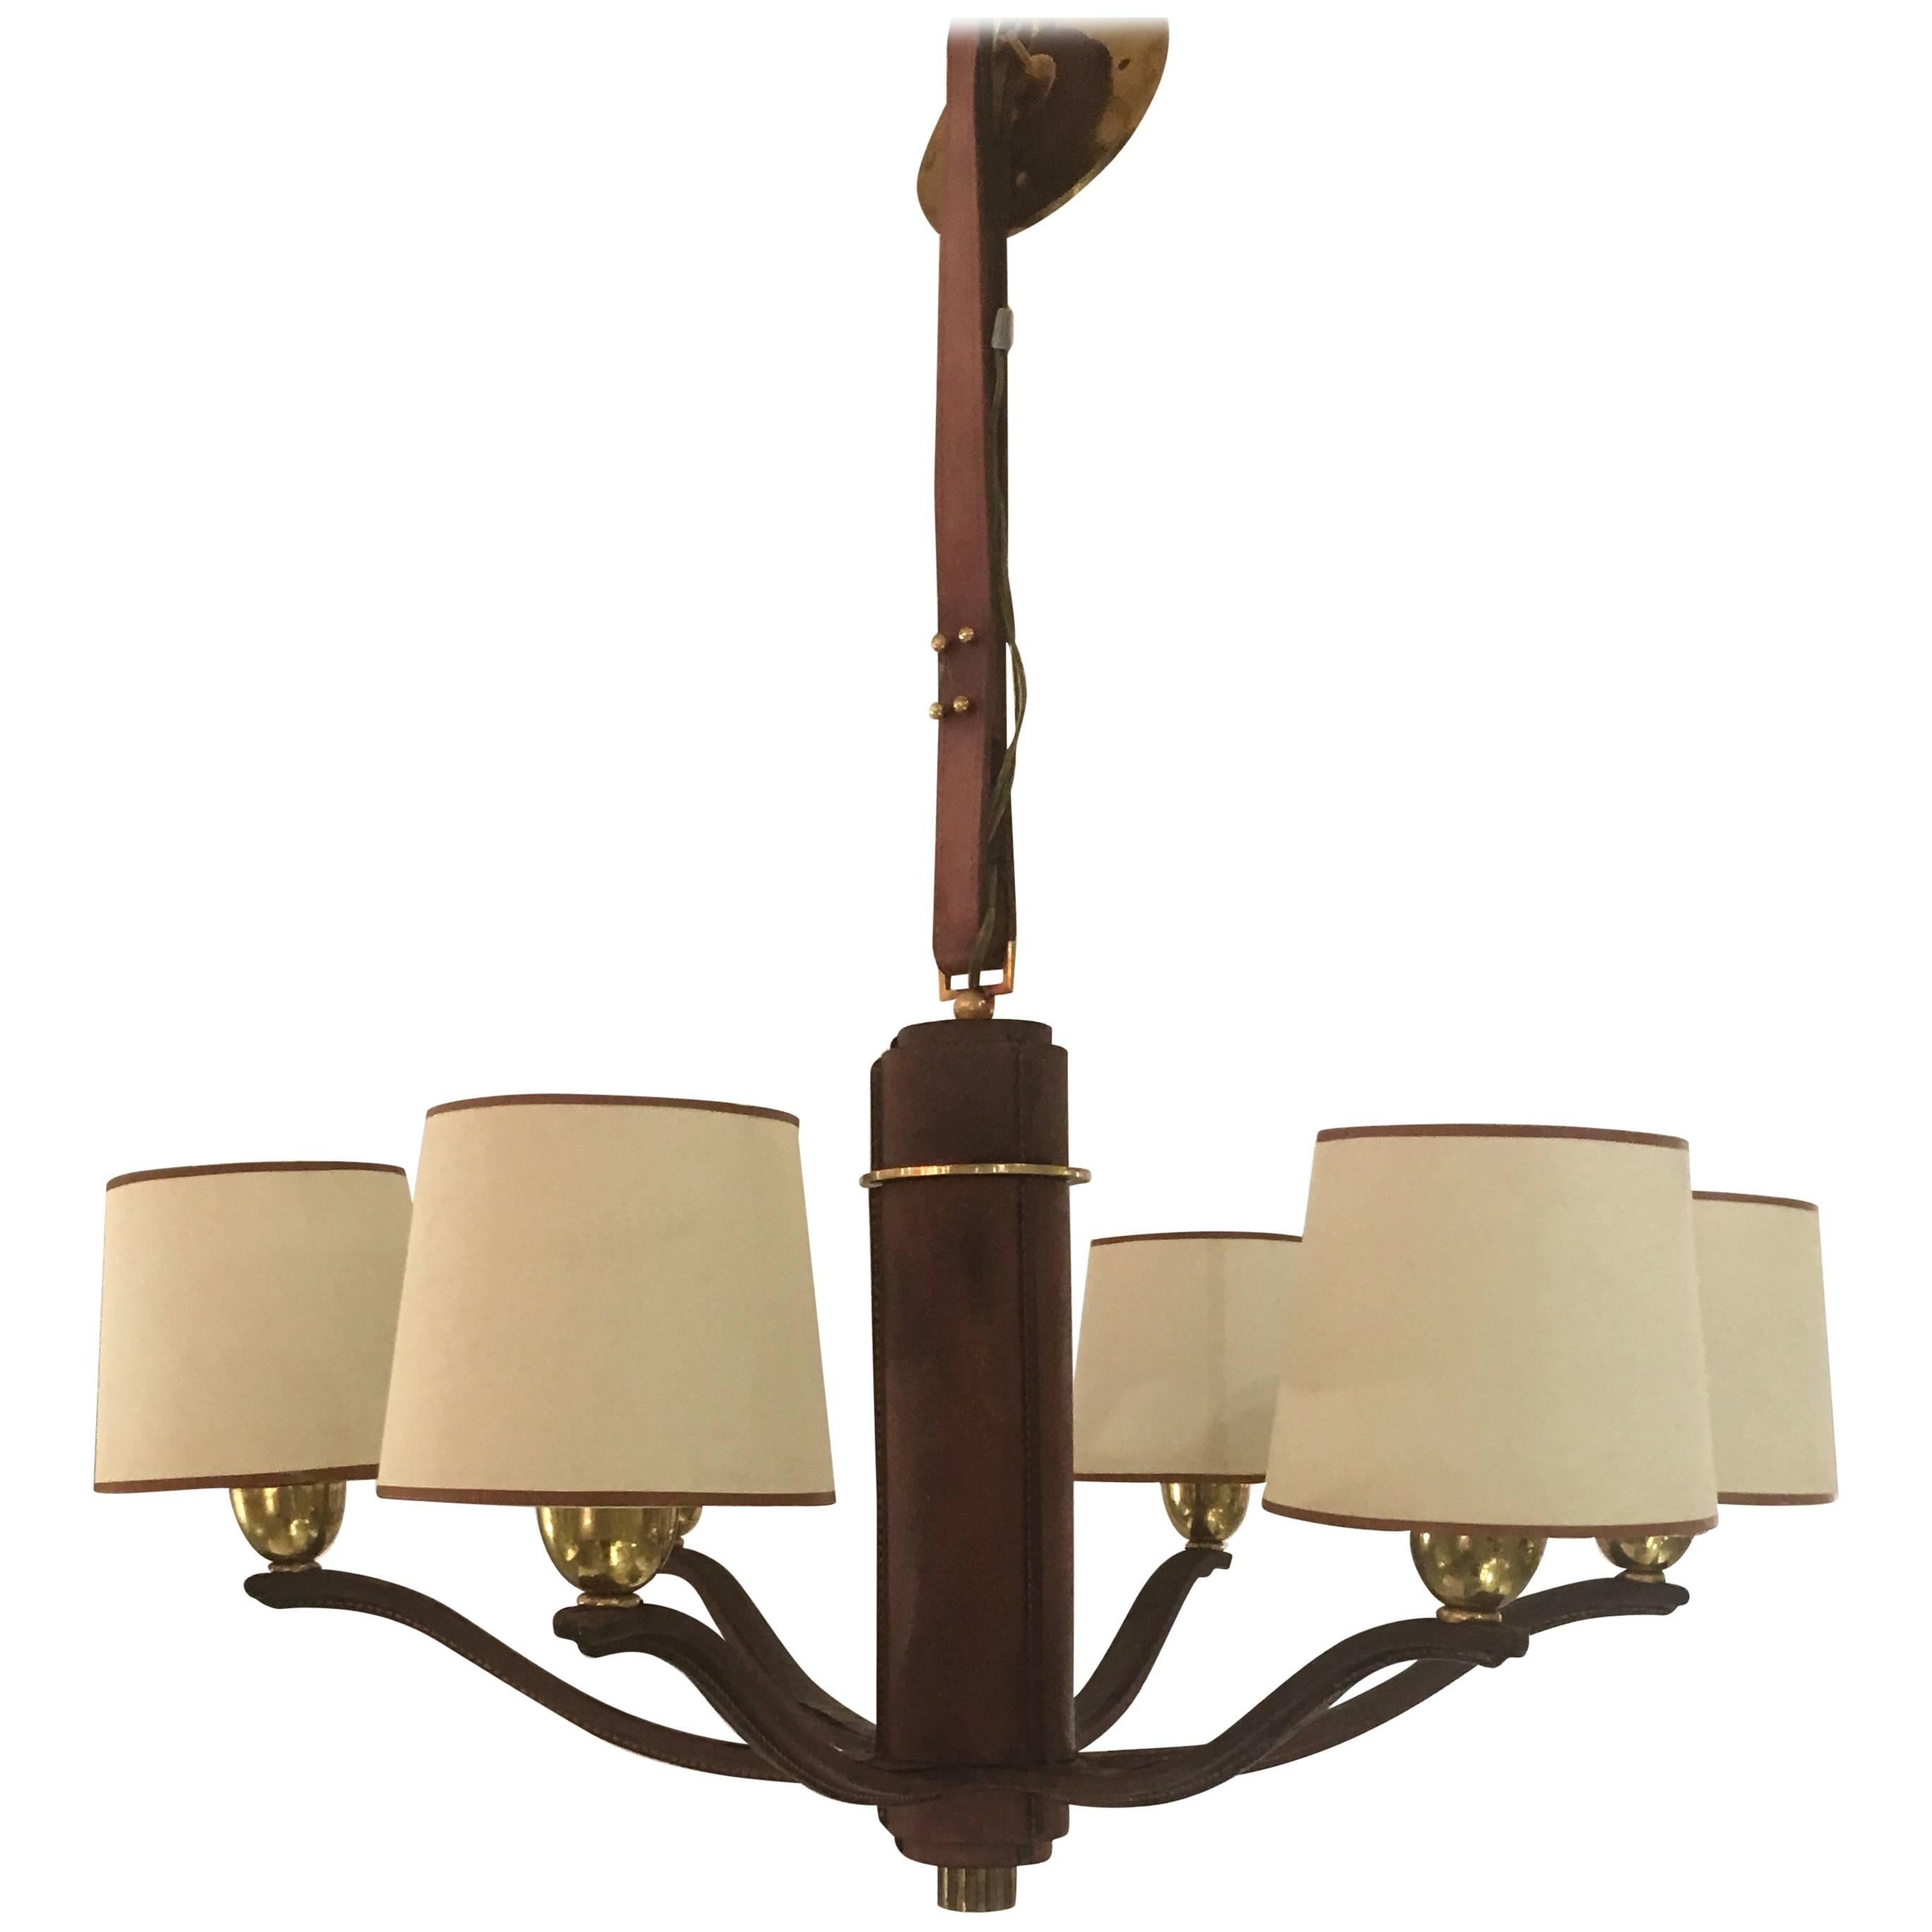 Pigskin and Brass Chandelier by Longchamp